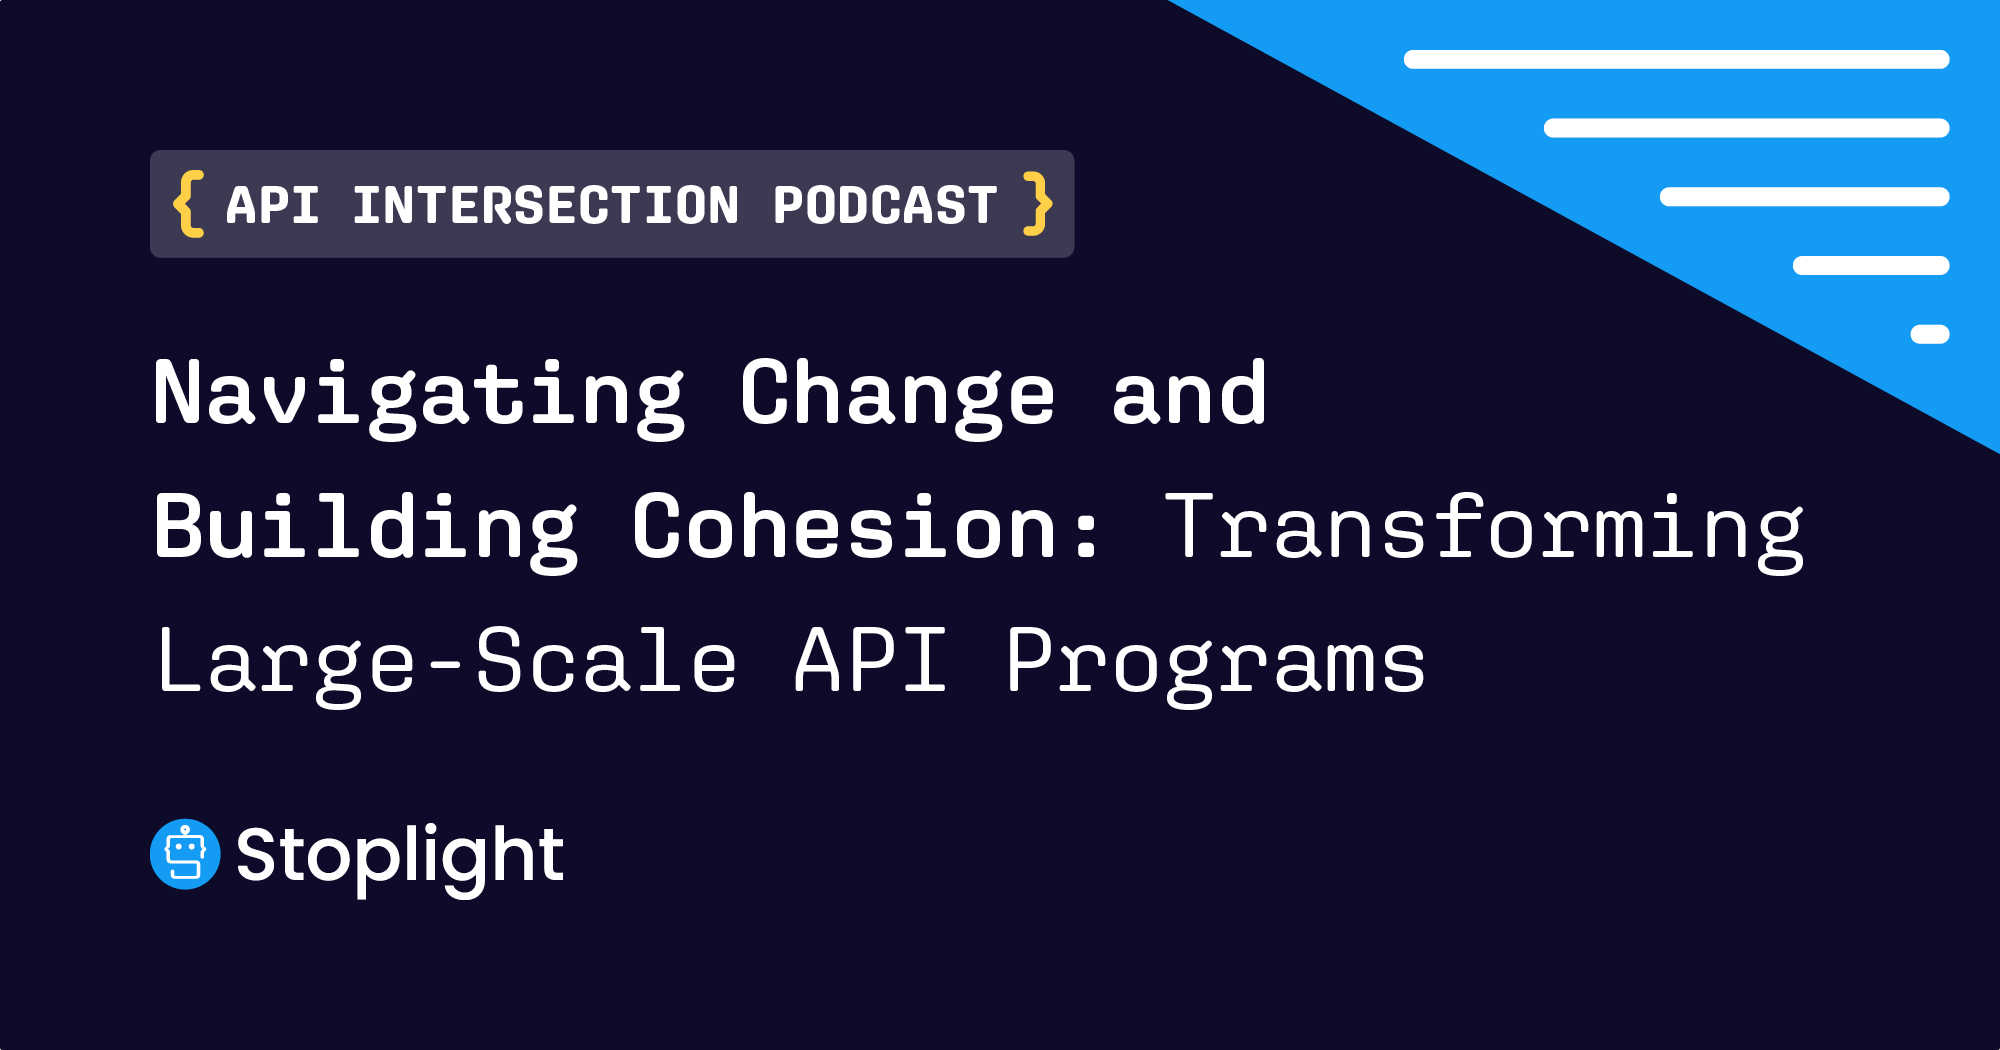 Navigating Change and Cohesion: Transforming Large-Scale API Programs